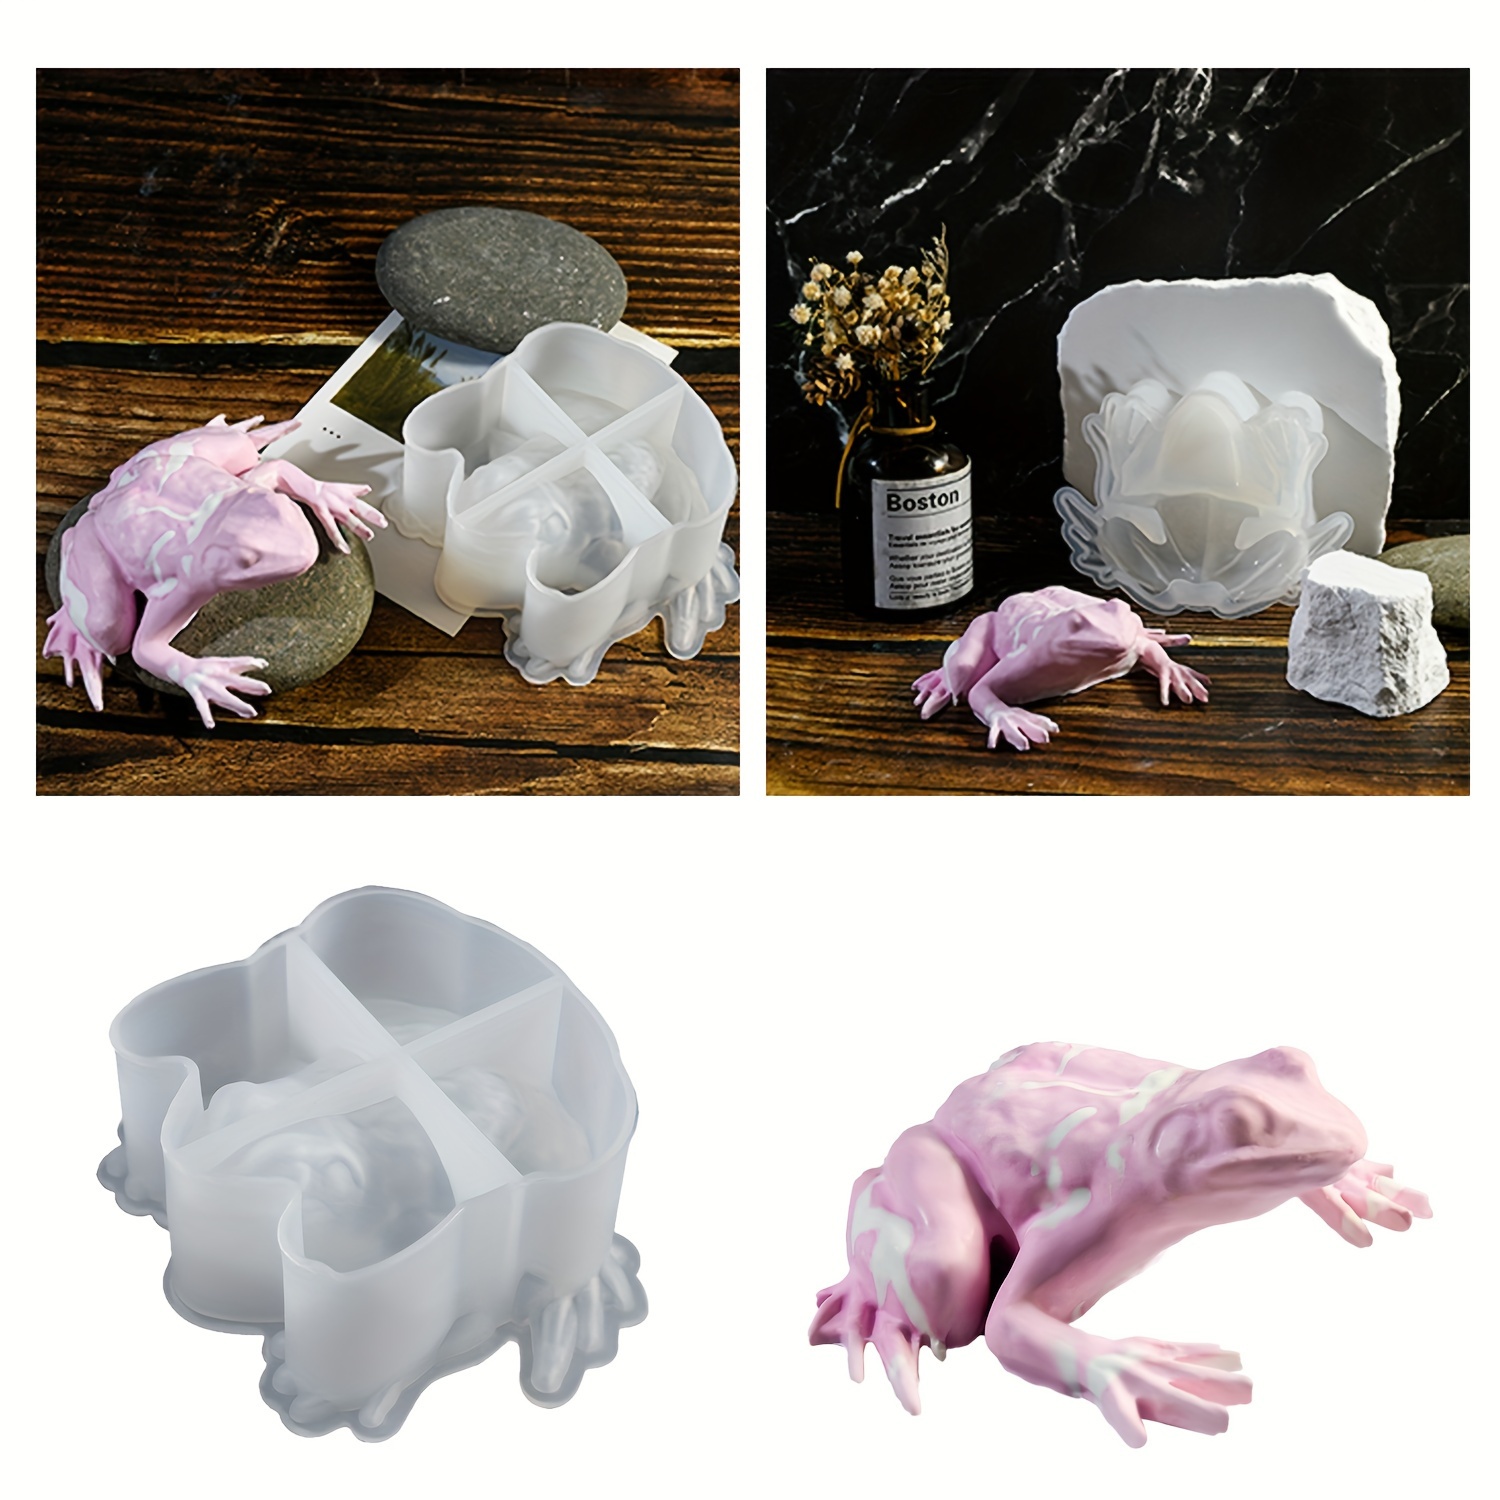 

Diy Adorable Frog Silicone Mold, Scented Candle Wax Mould, Plaster Epoxy Resin Craft Mold For Home Decor, Animal Shaped 3d Cute Resin Molds